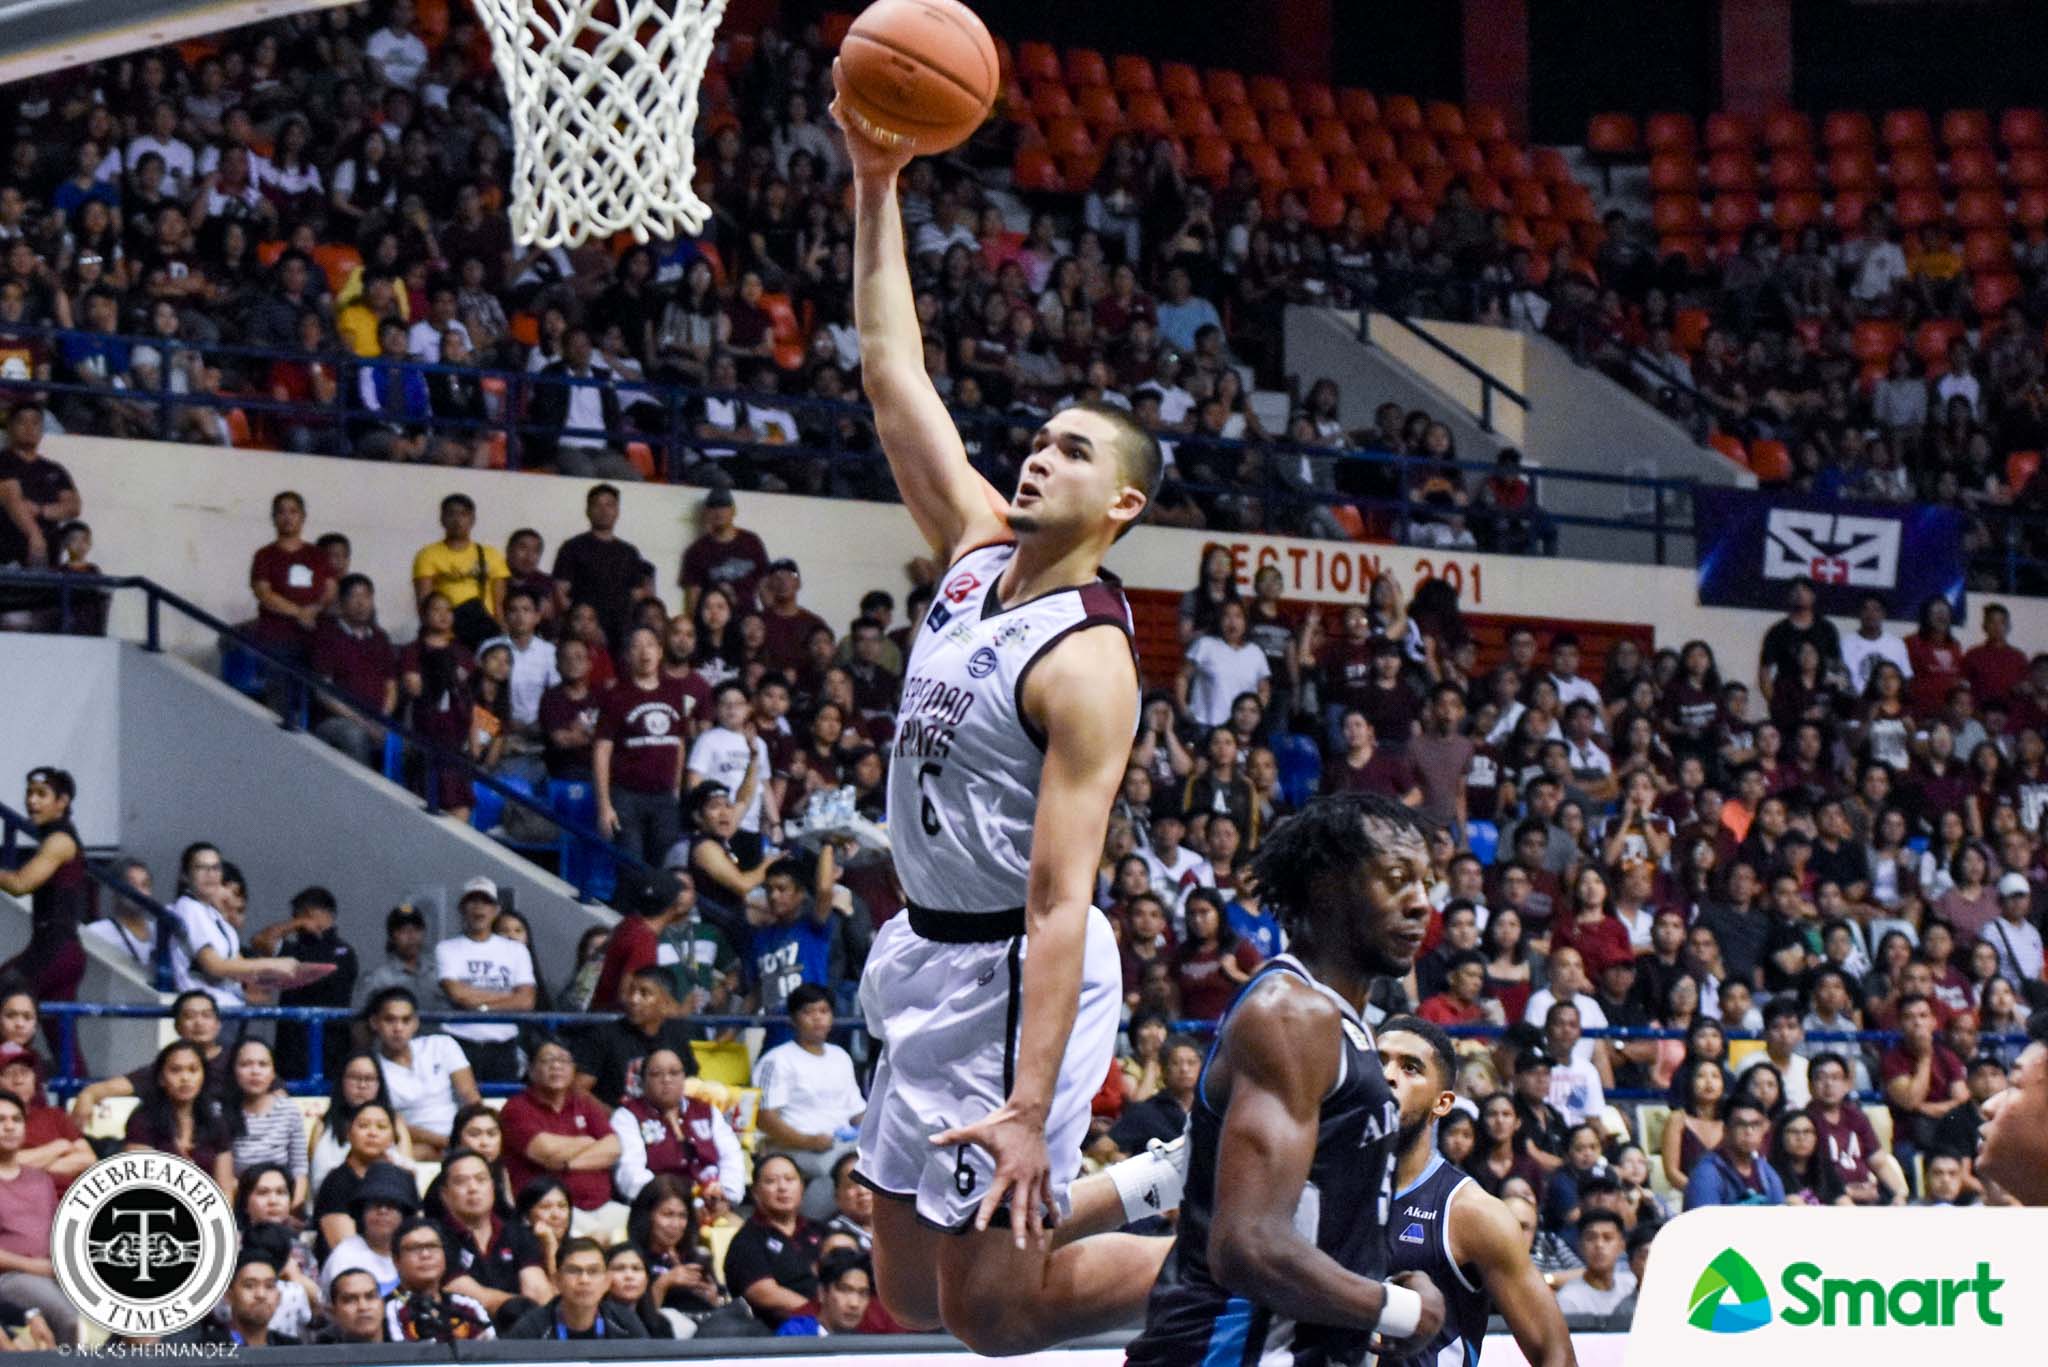 UAAP-82-MBB-ADU-VS.-UP-KOBE-PARAS-2 Perasol on letting Kobe Paras go: 'He is too talented to be kept waiting' Basketball News UAAP UP  - philippine sports news